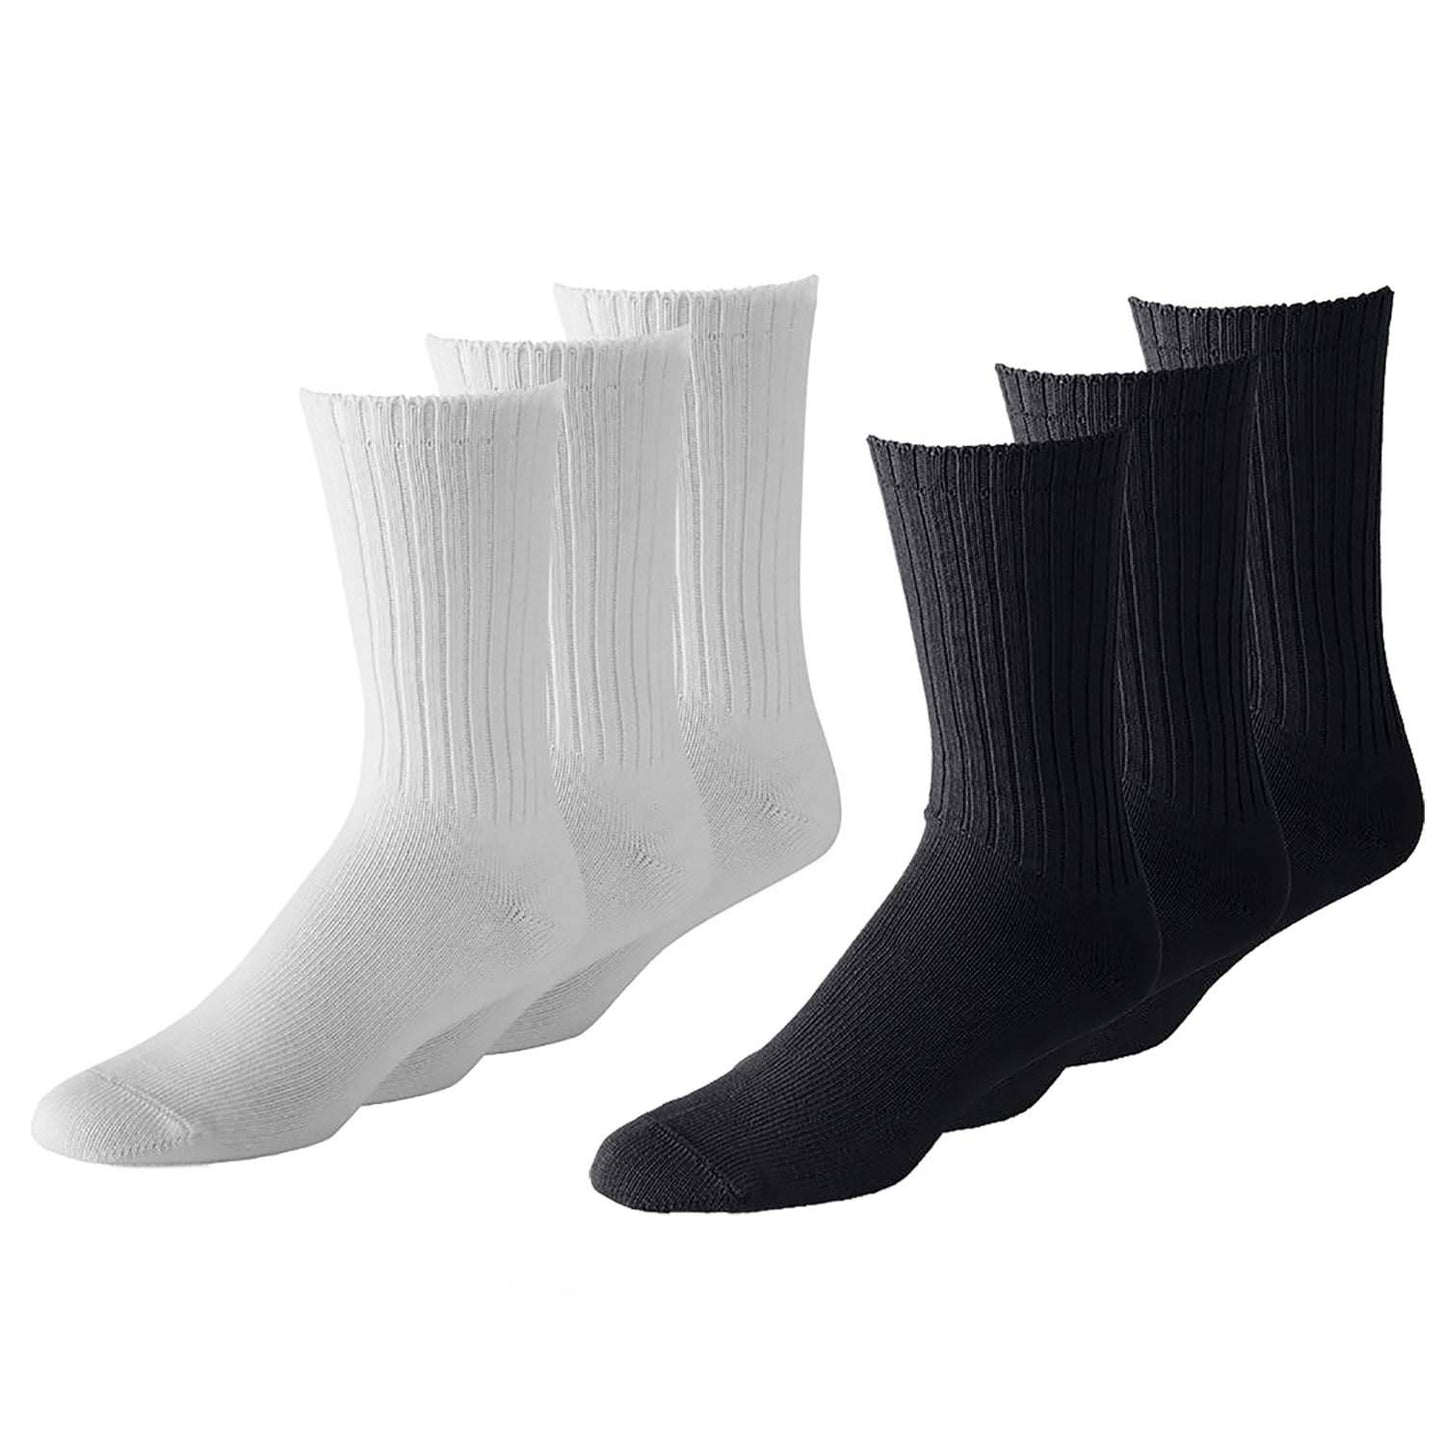 420 Pairs Women's Athletic Crew Socks - Wholesale Lot Packs - Any Shoe Size